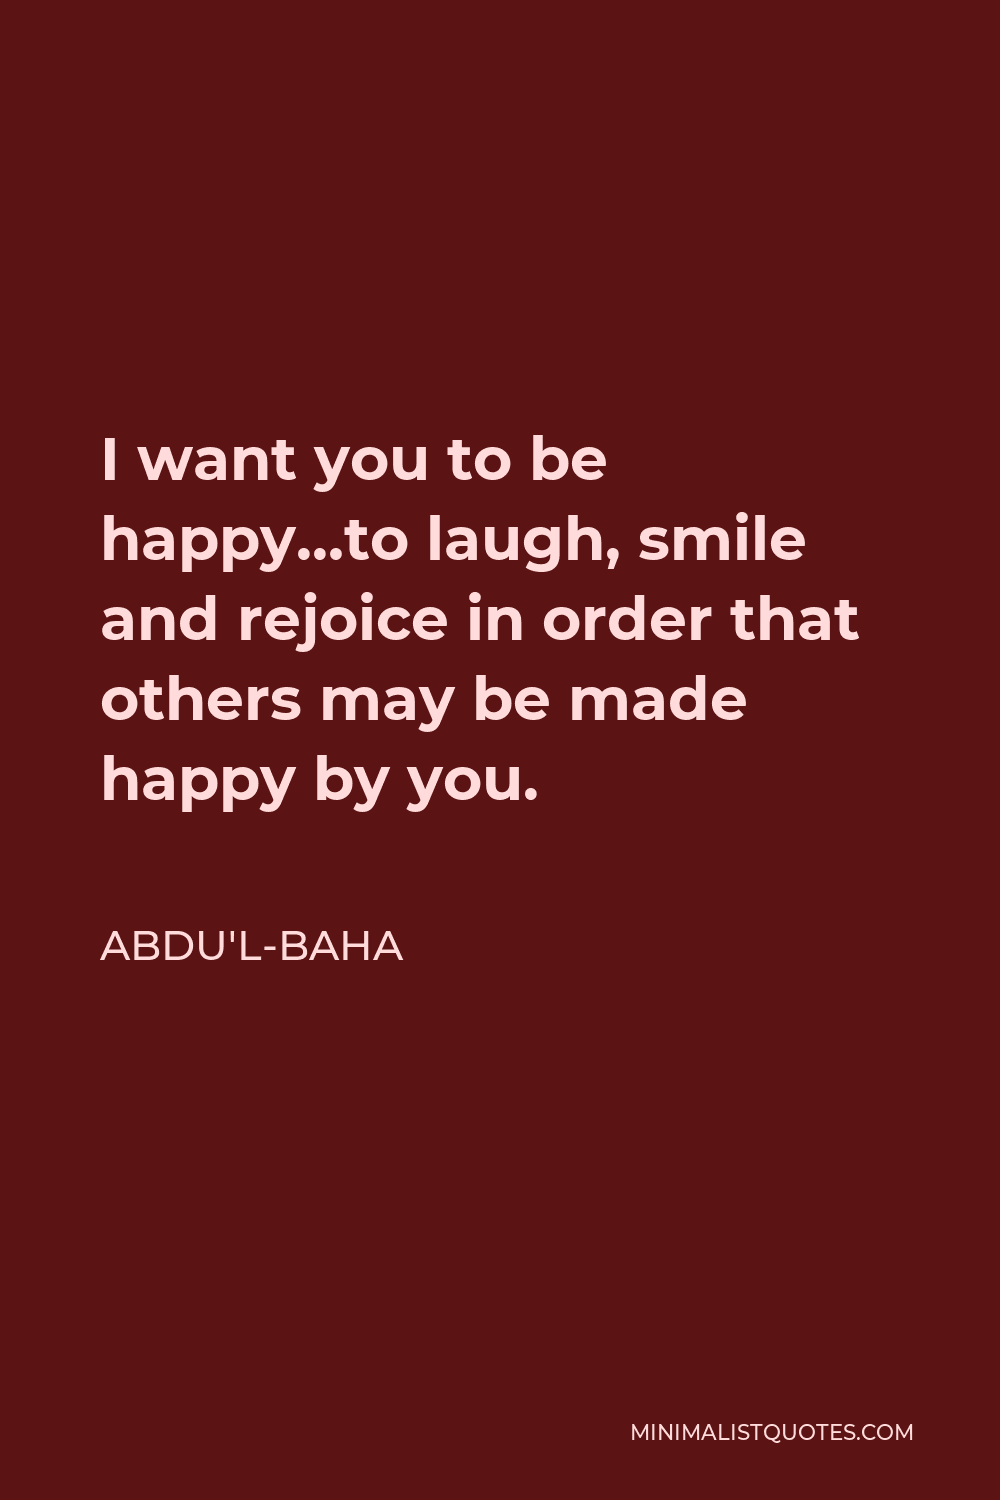 Abdu'l-Baha Quote - I want you to be happy…to laugh, smile and rejoice in order that others may be made happy by you.